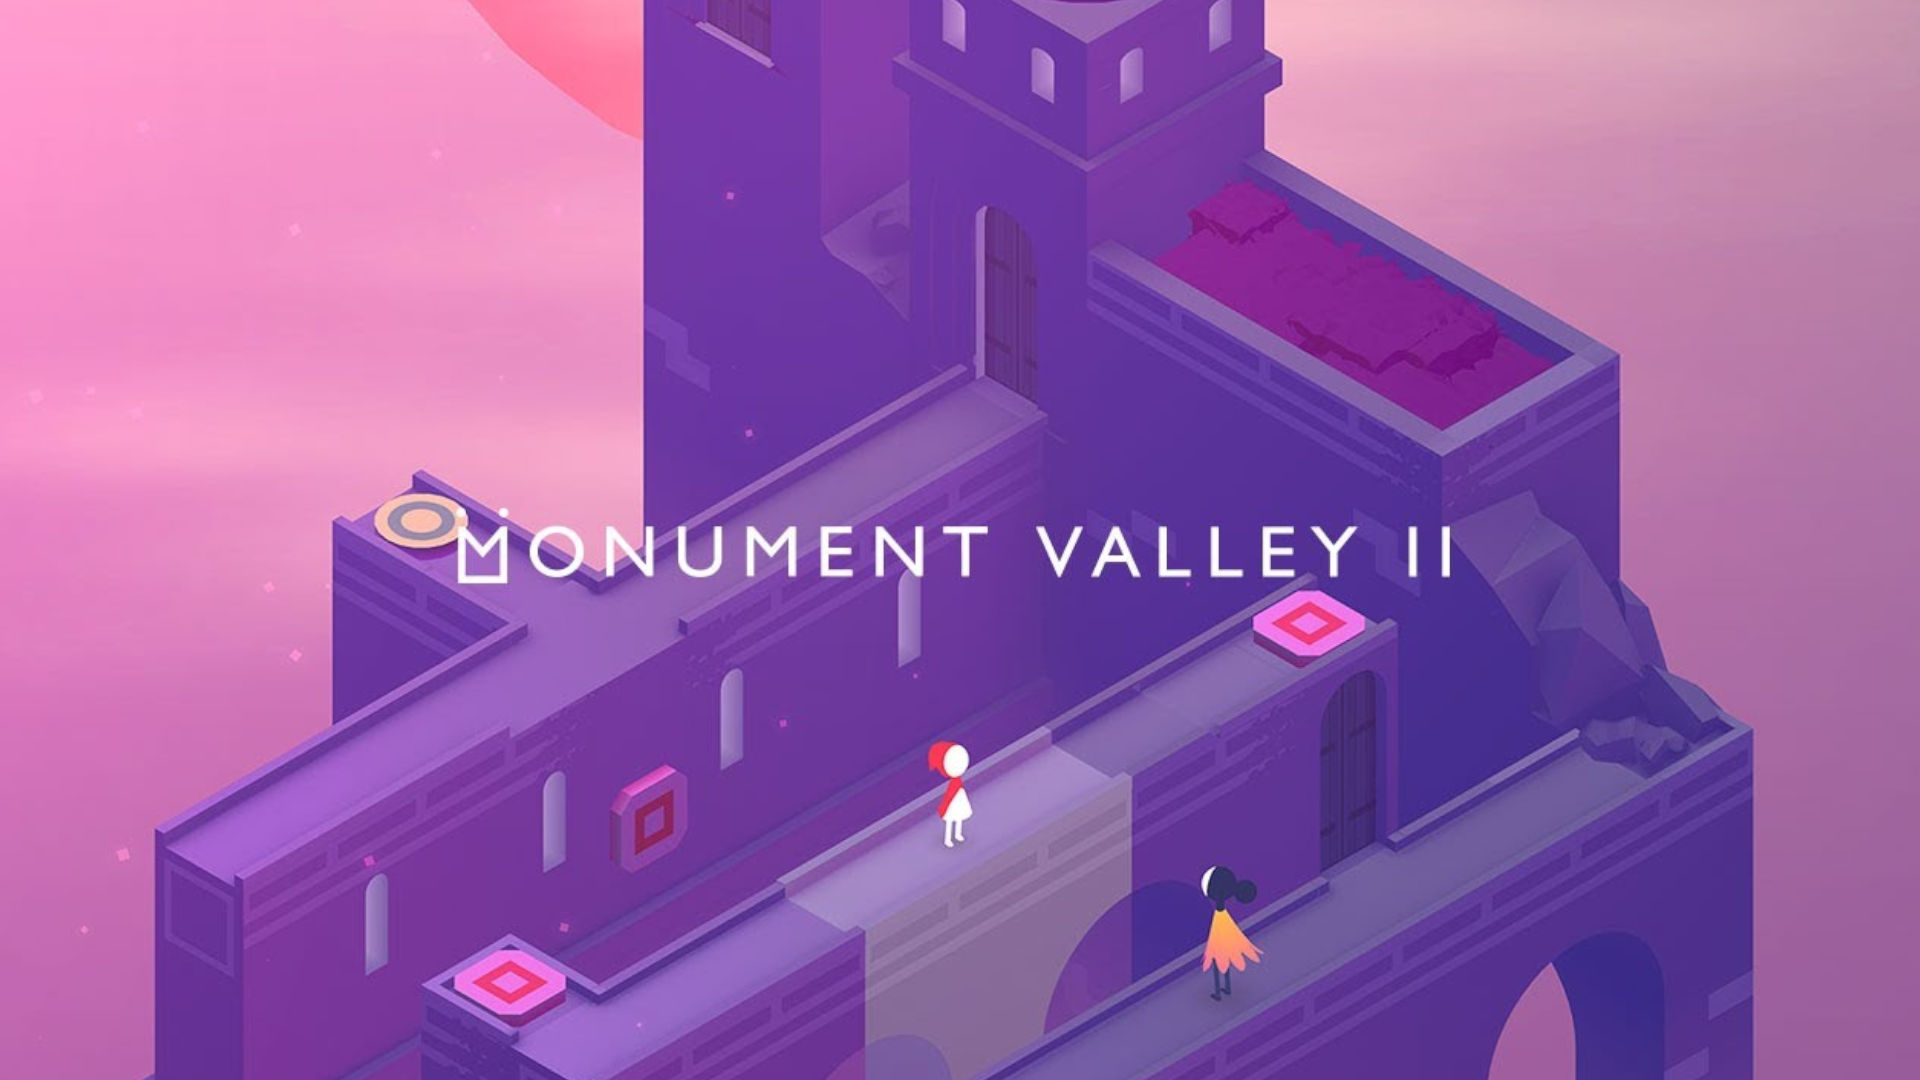 Special promo art for Monument Valley 2, another surprise entry on our list of boy games